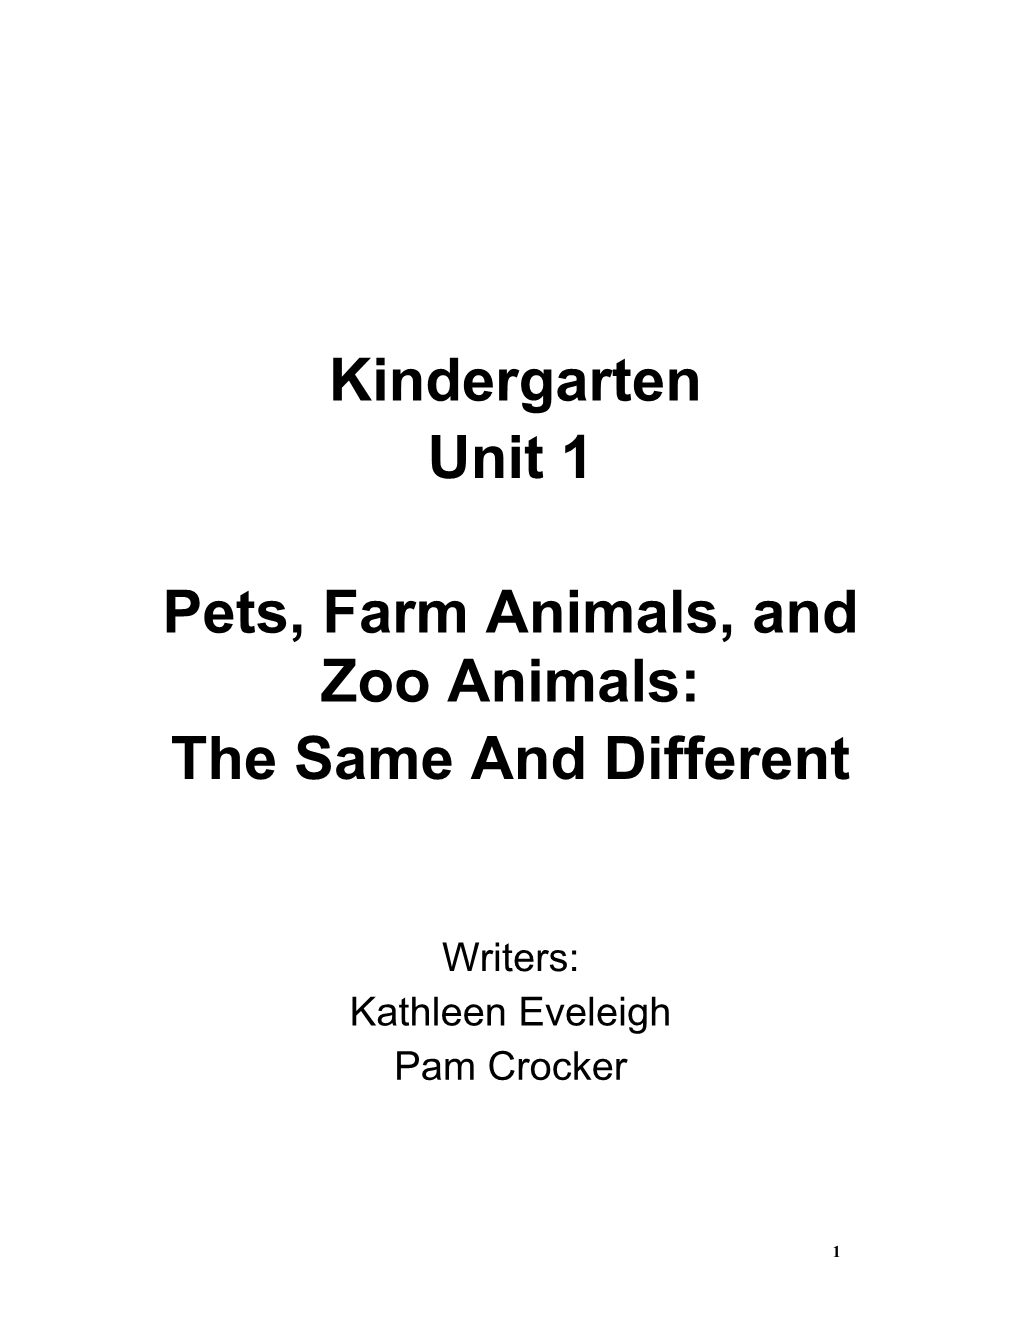 Pets, Farm Animals, and Zoo Animals: the Same and Different